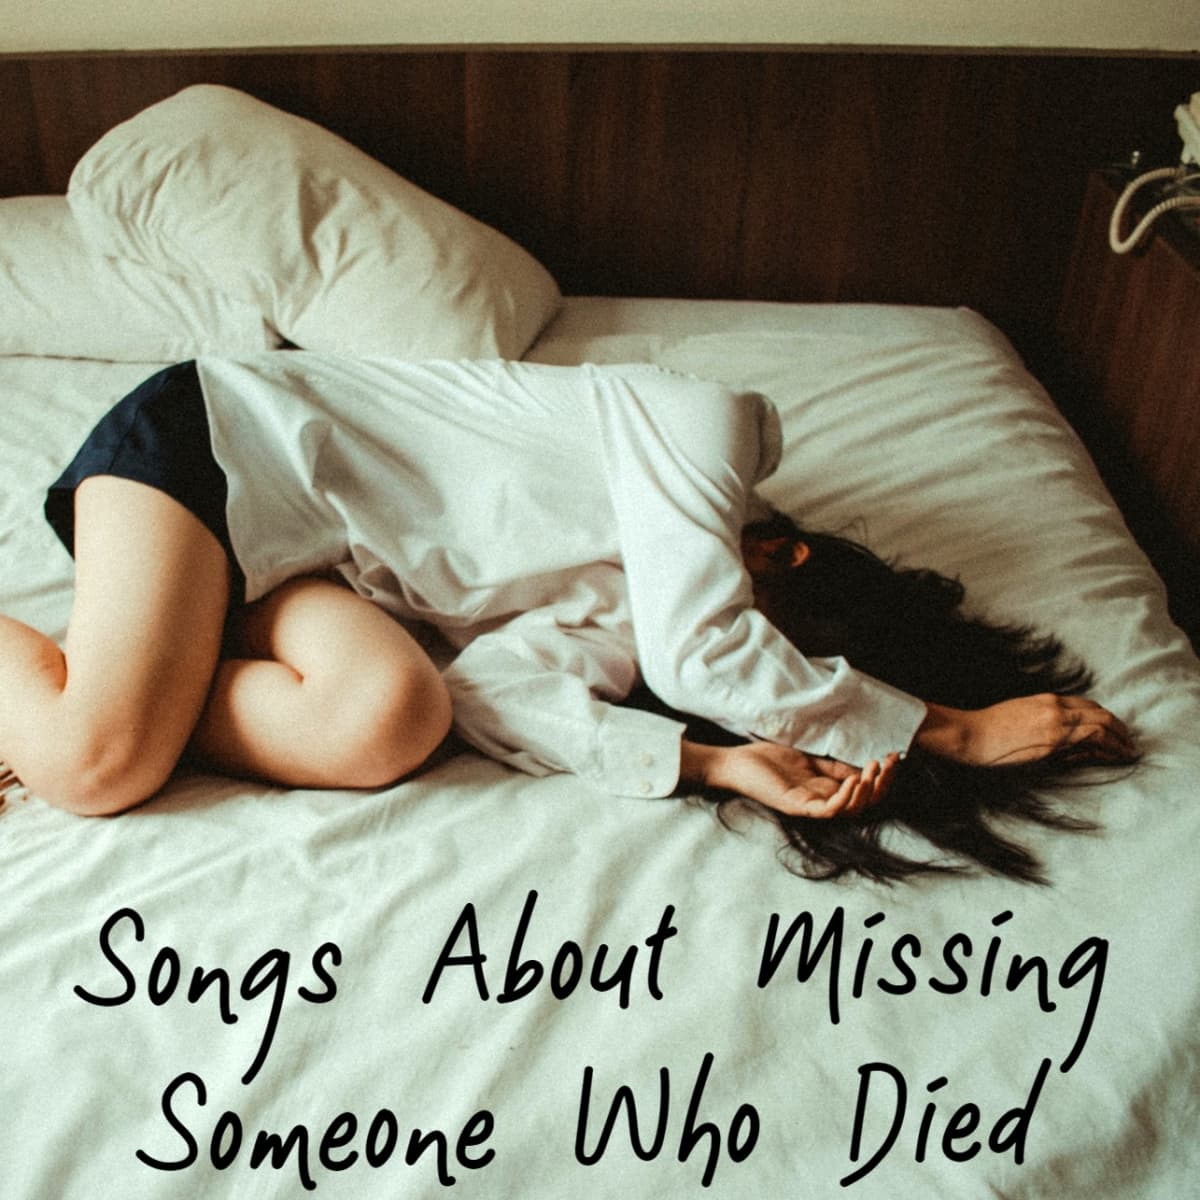 84 Songs About Missing Someone Who Died - Spinditty